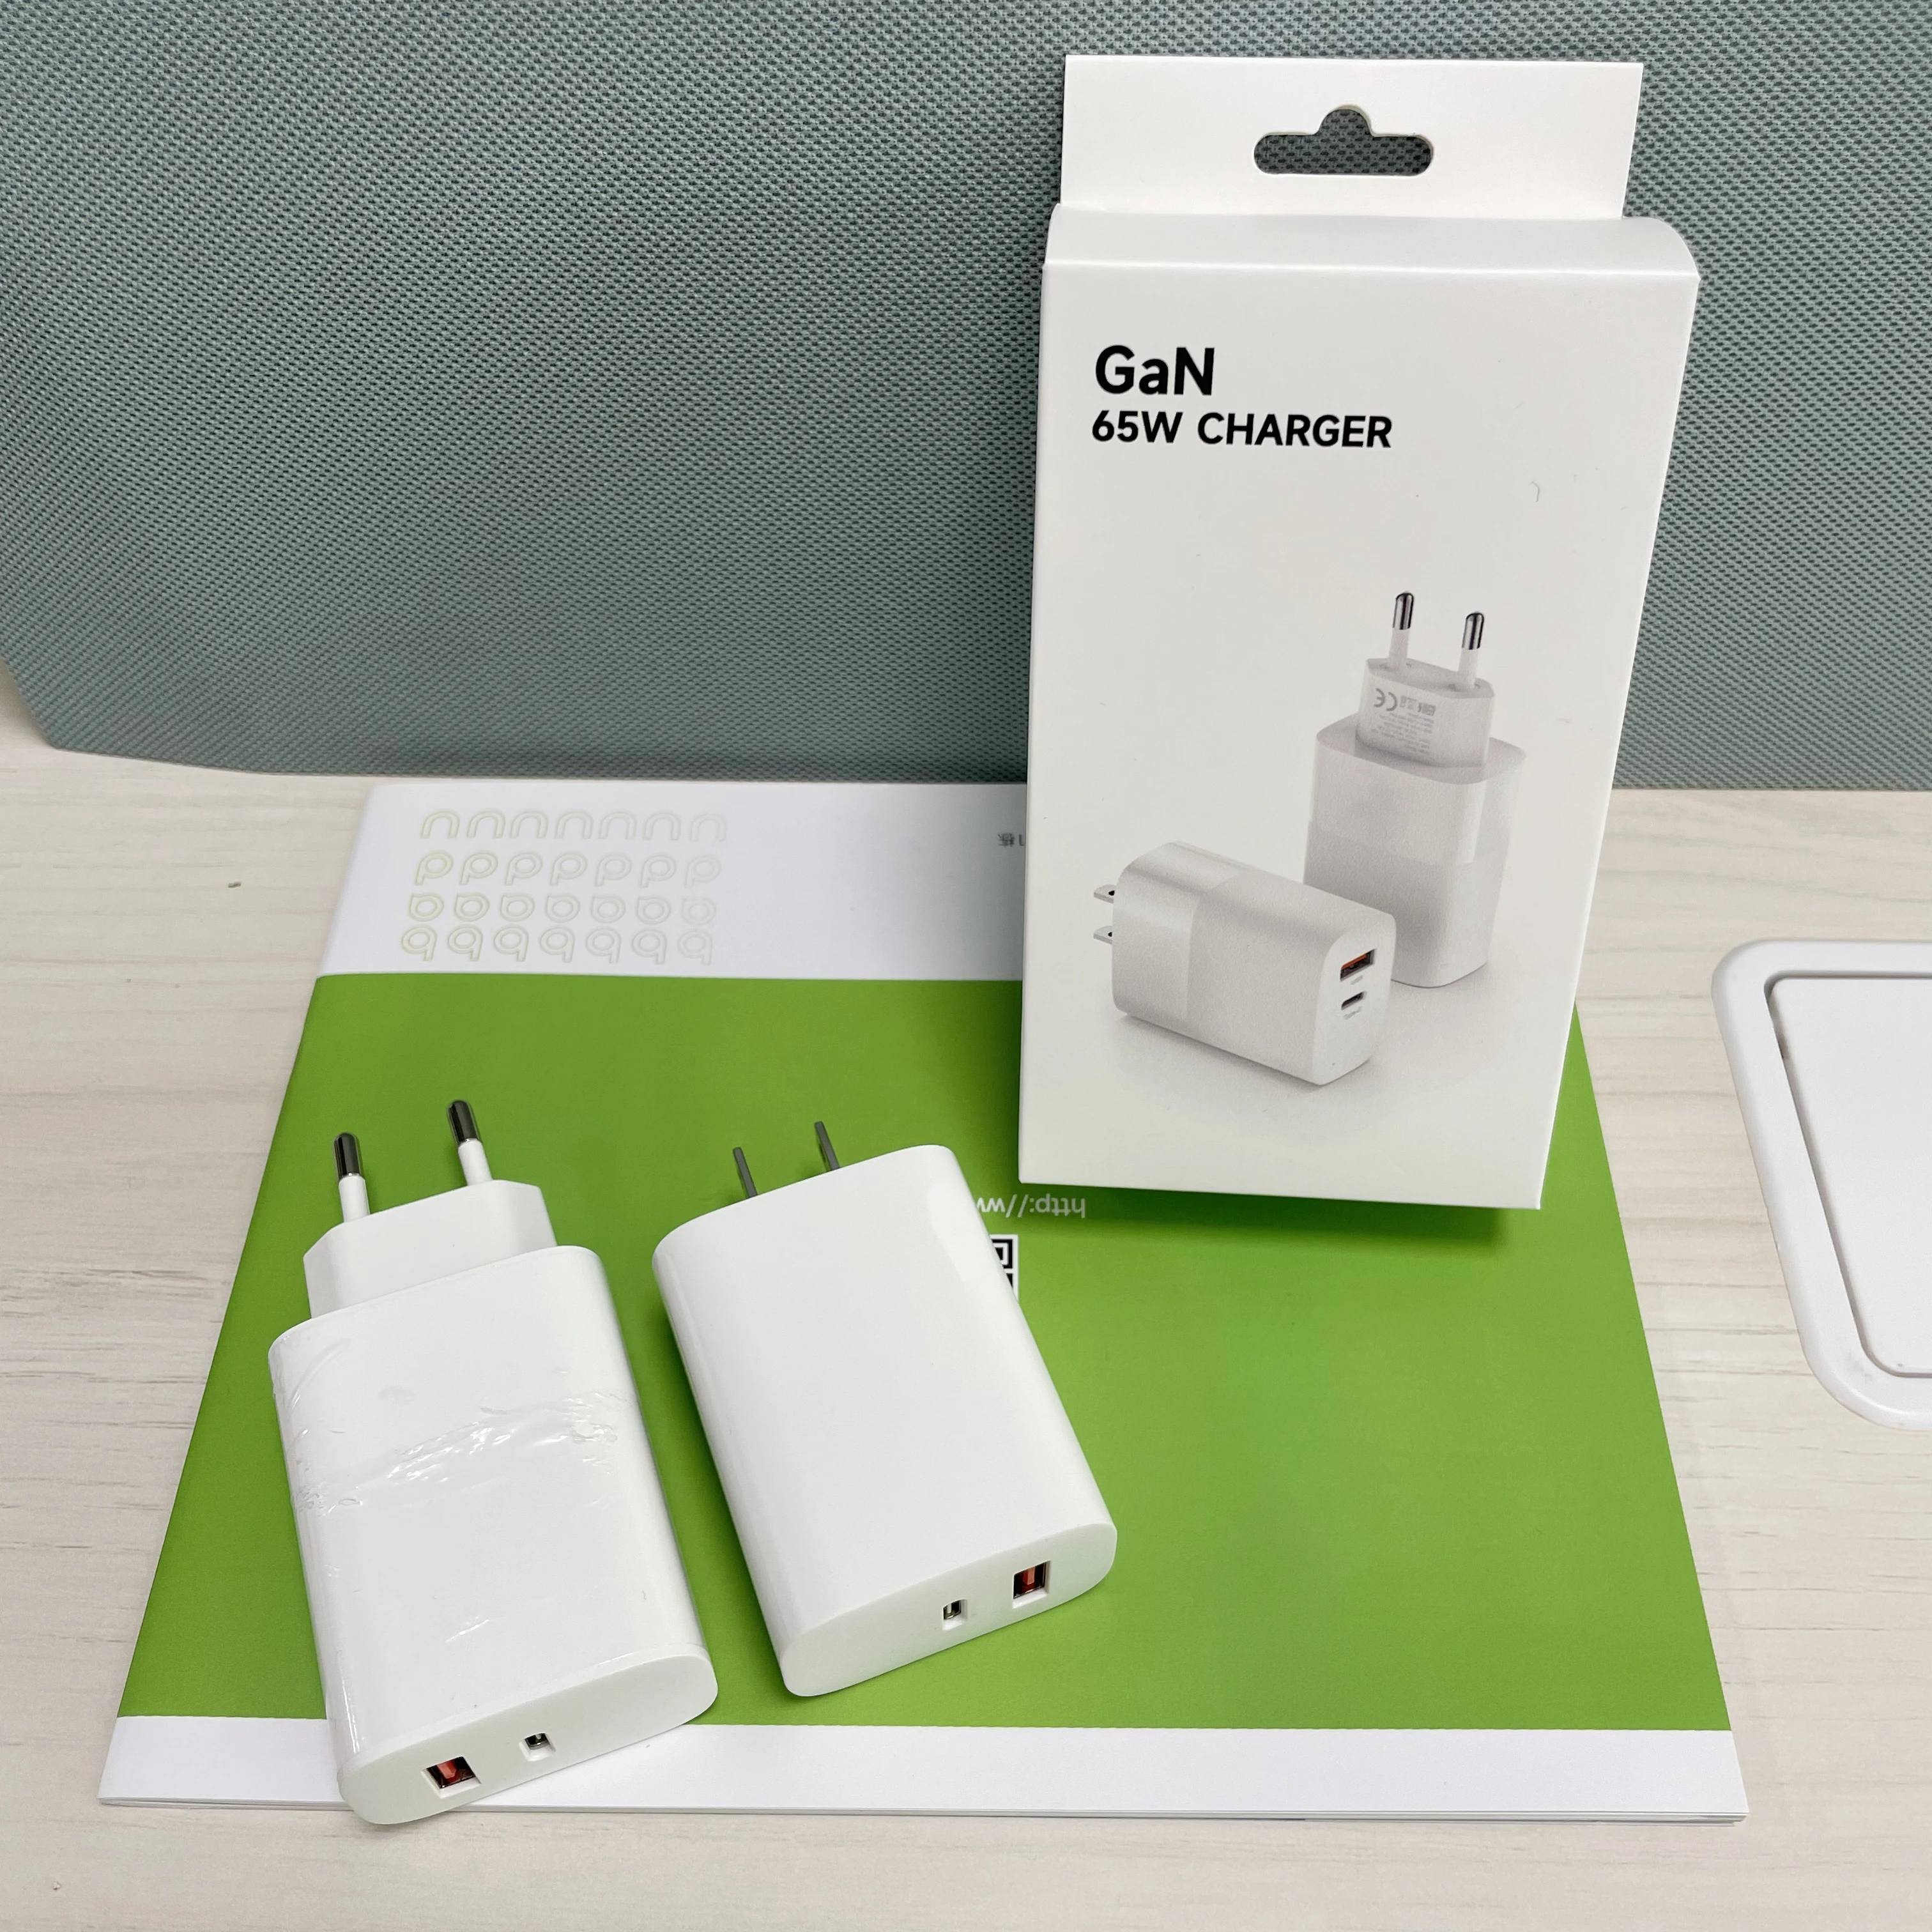 

65W Fast Portable 2 Port Charger [GaN Tech] USB-C QC PD 3.0 Power Adapter Type C Charging Block for USBC Laptop